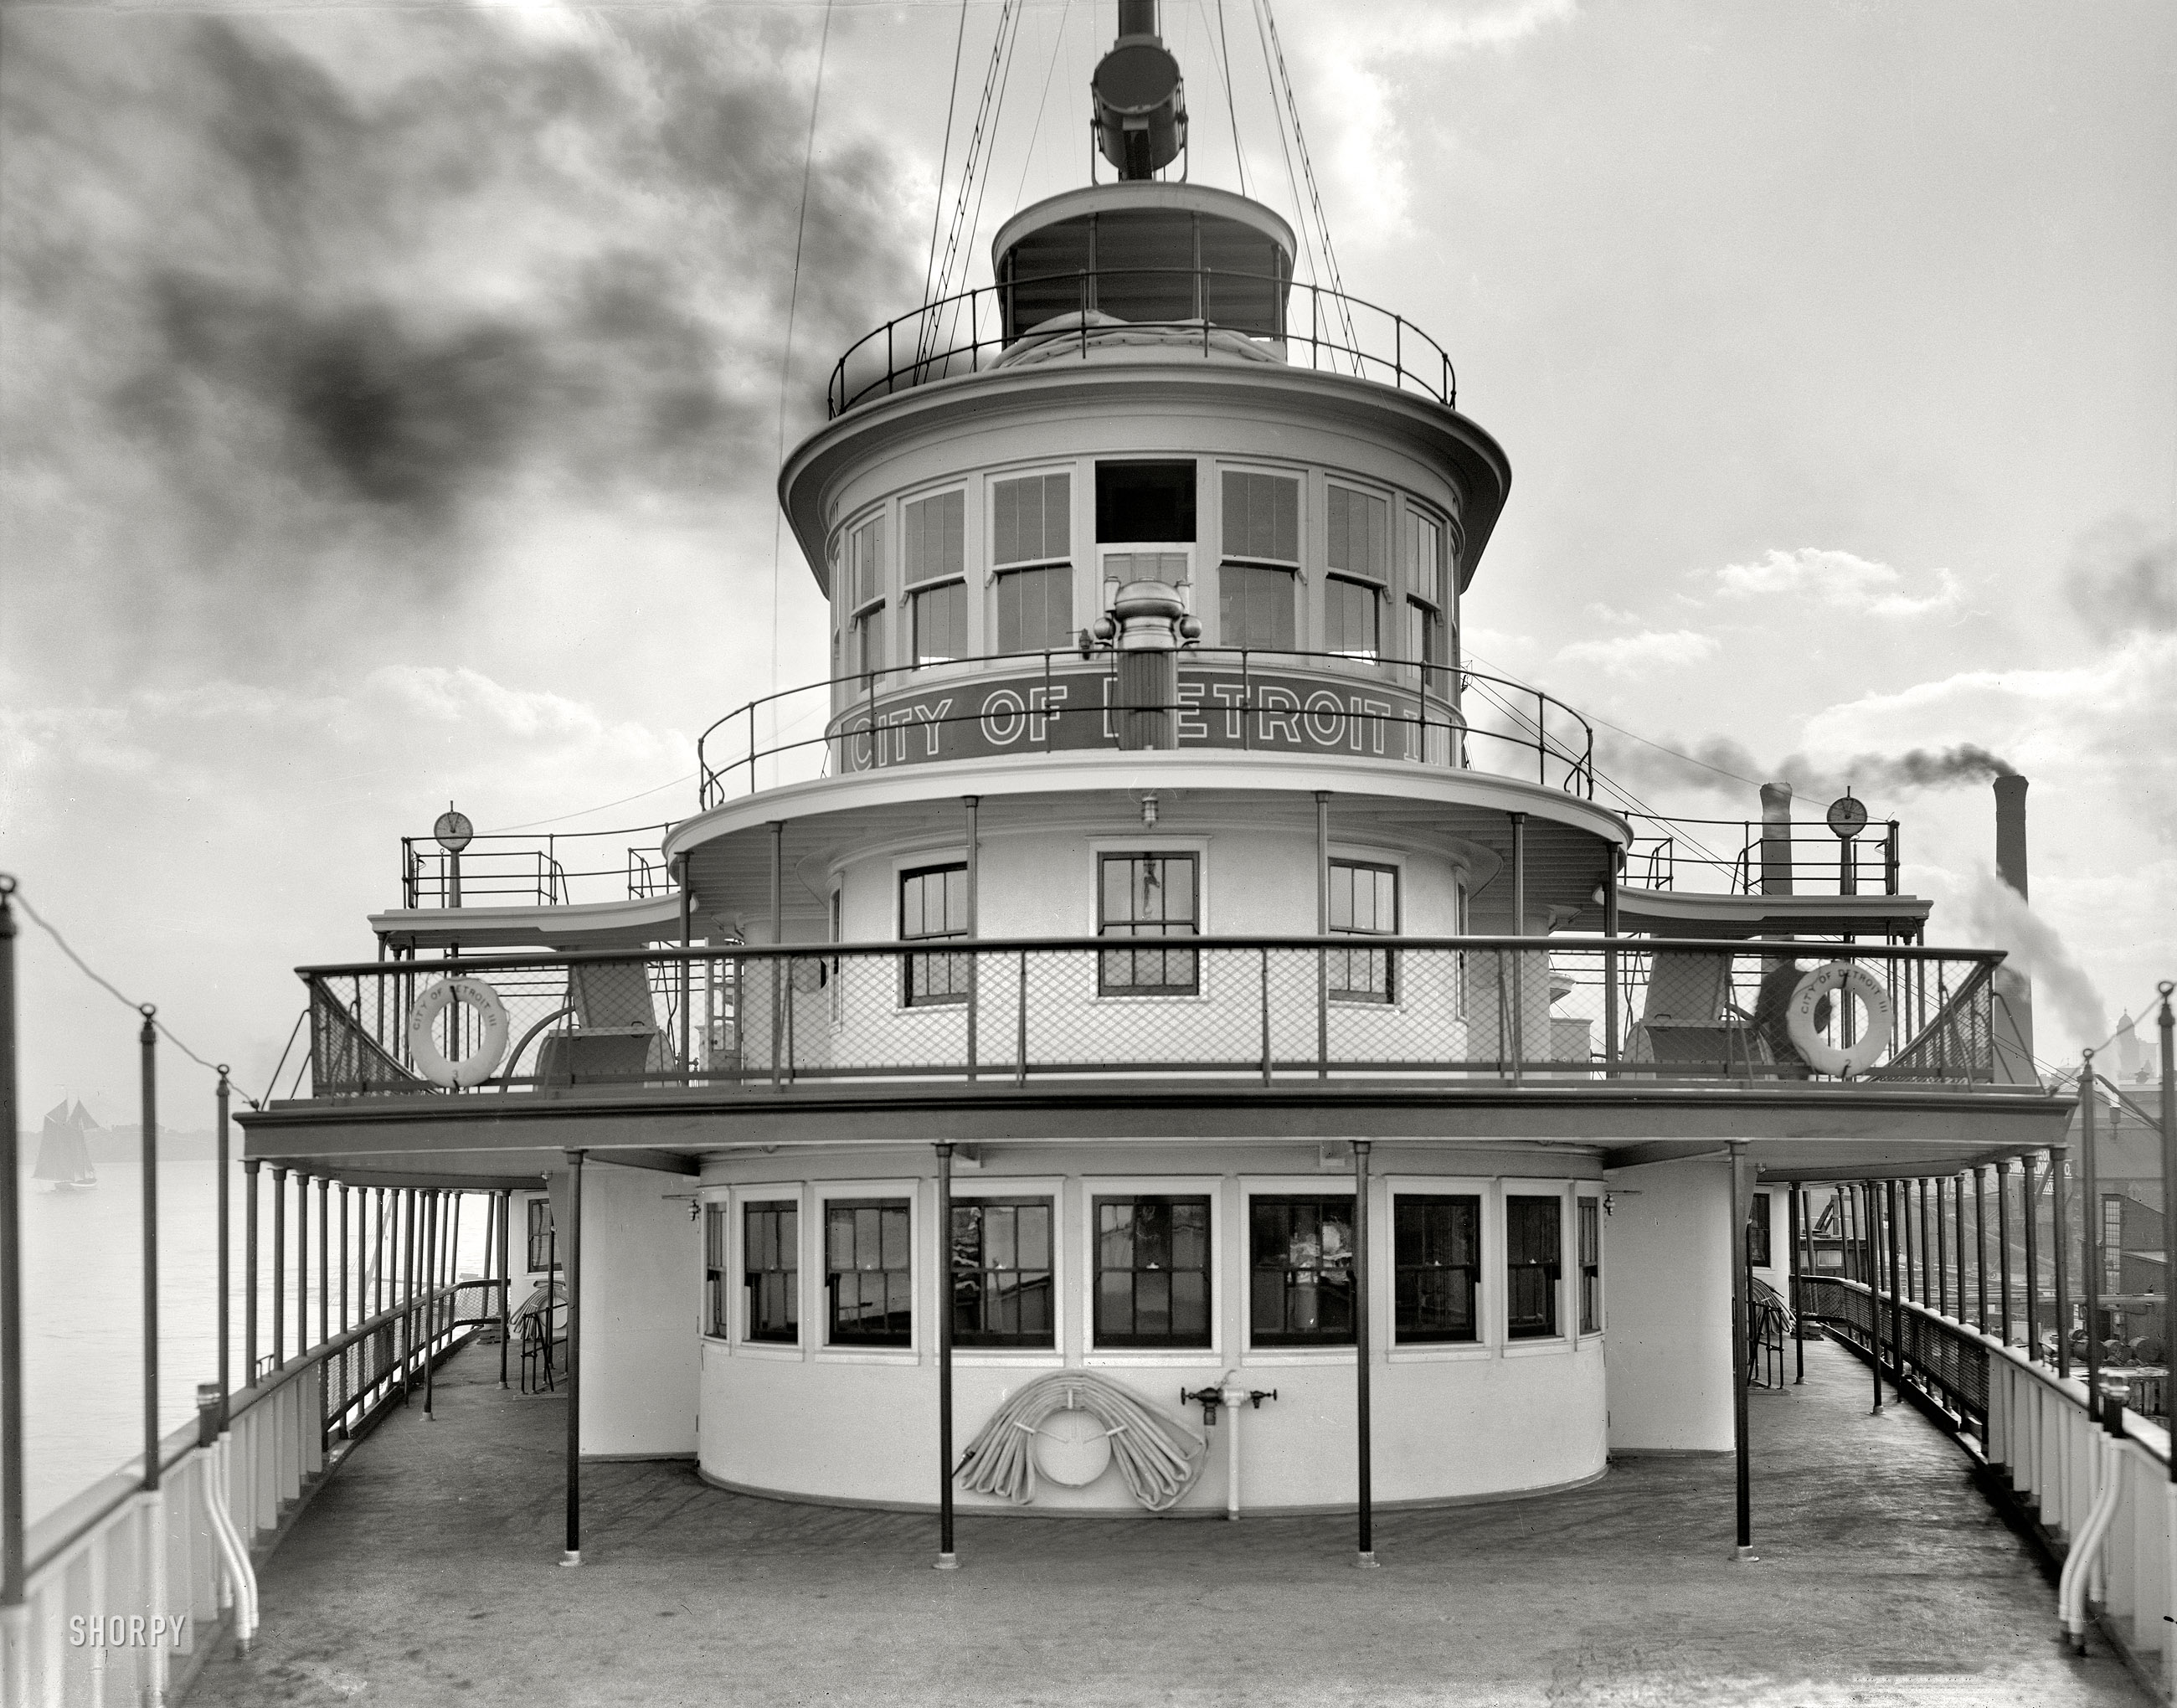 Circa 1912. "Steamer City of Detroit III, pilot house and bridge." 8x10 inch dry plate glass negative, Detroit Publishing Company. View full size.